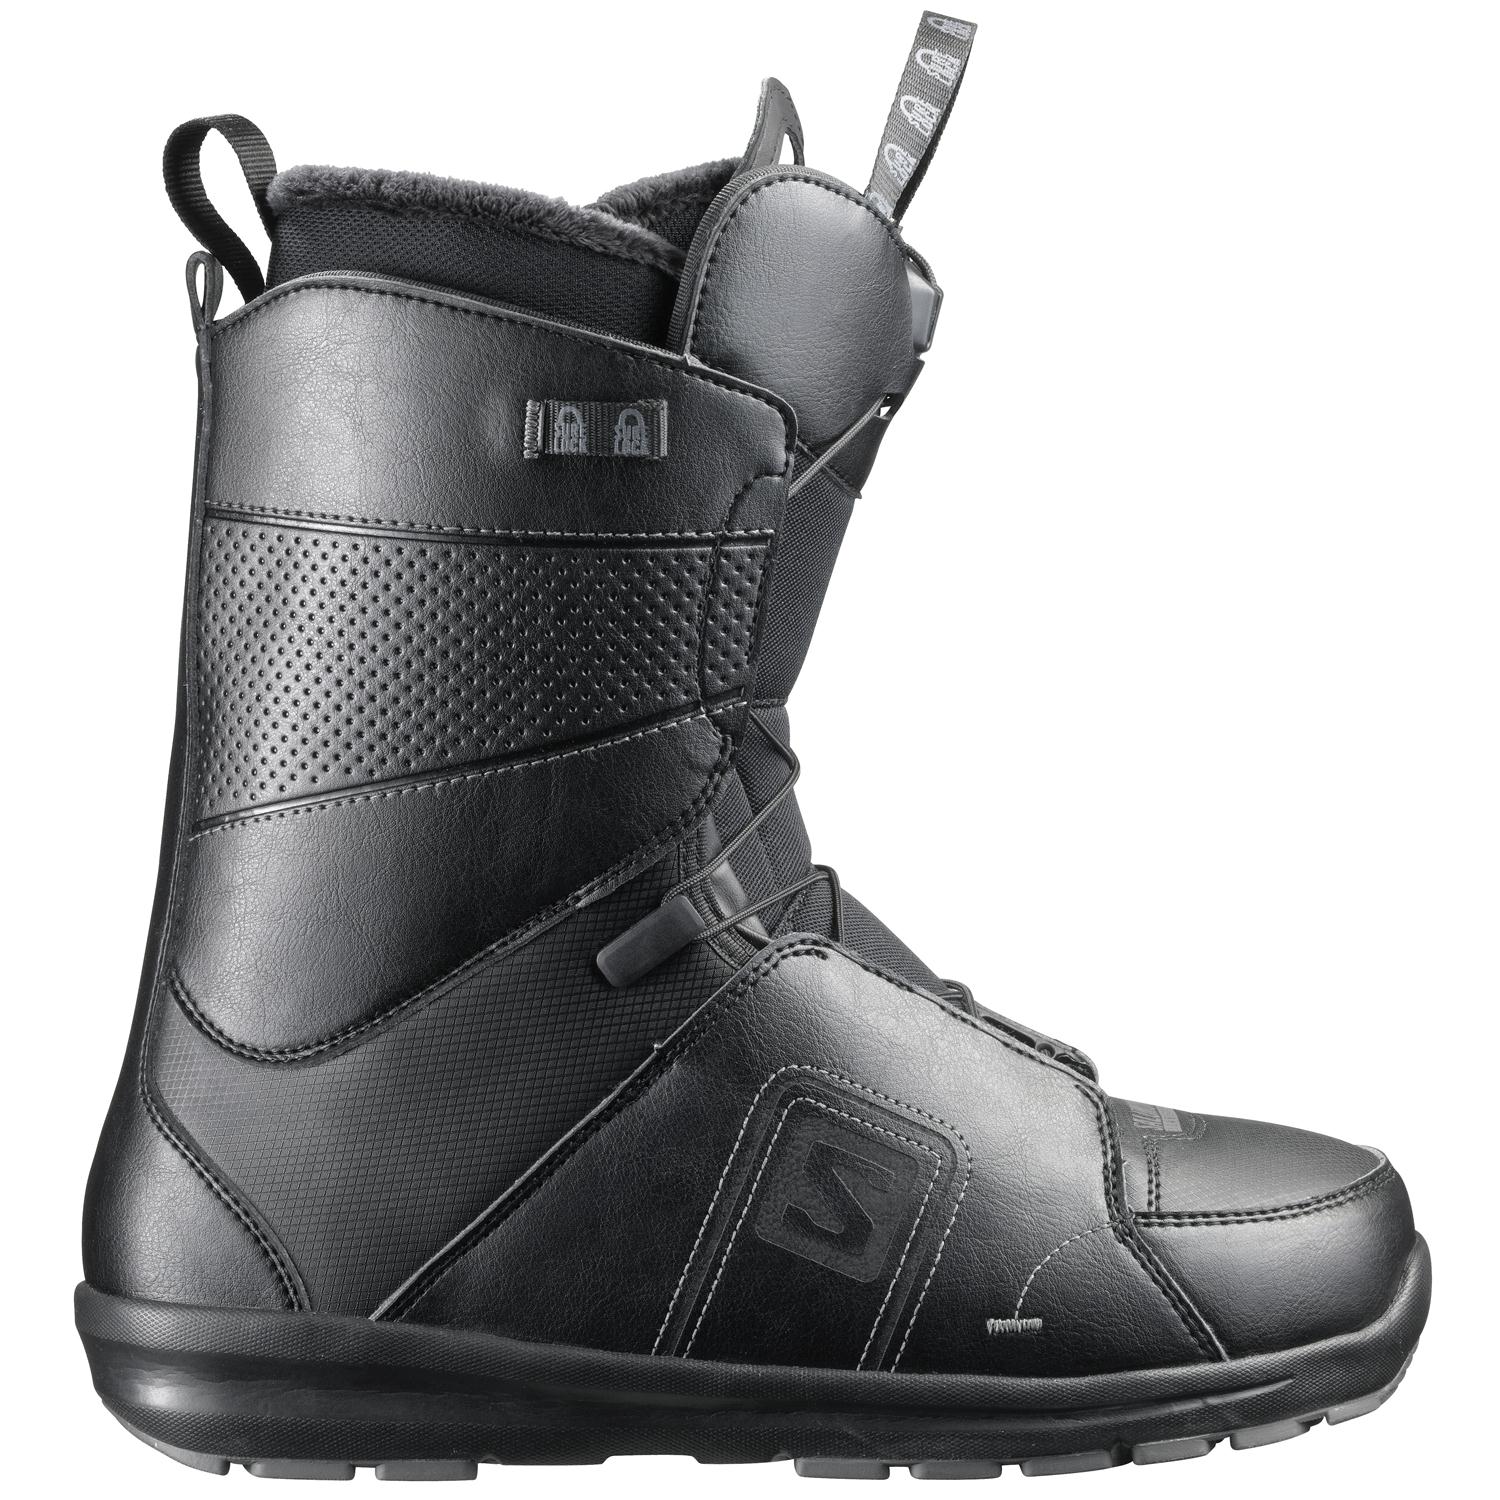 Salomon Faction Snowboard Boots - New Demo 2014 | evo outlet